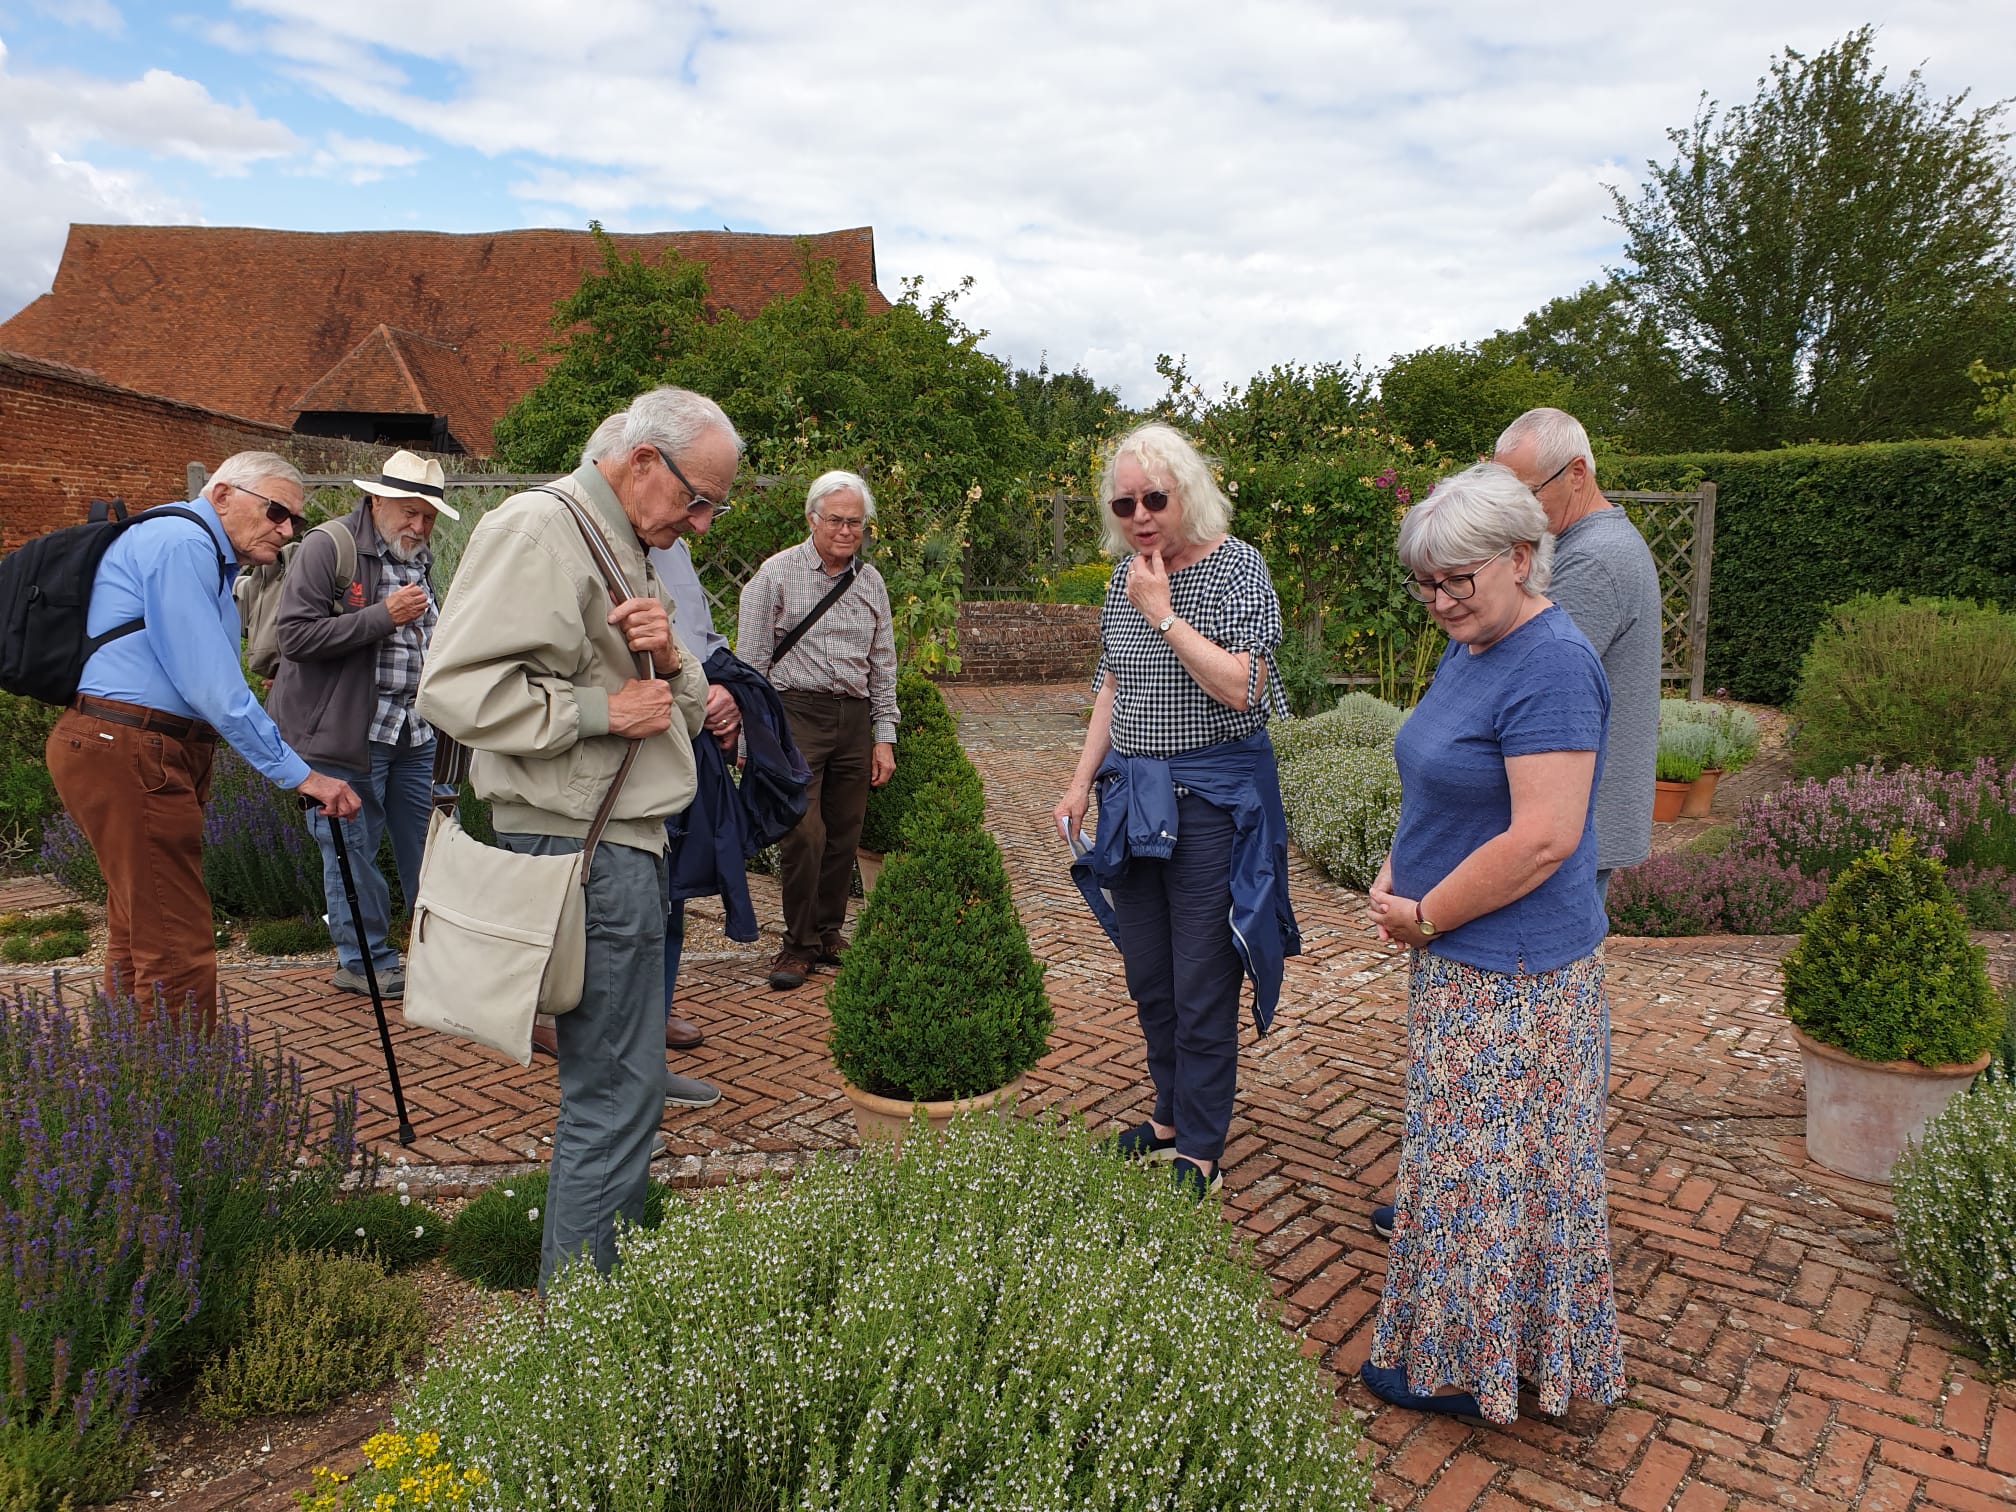 Essex - Tour of Cressing Temple's walled Tudor Garden with tips on growing herbs